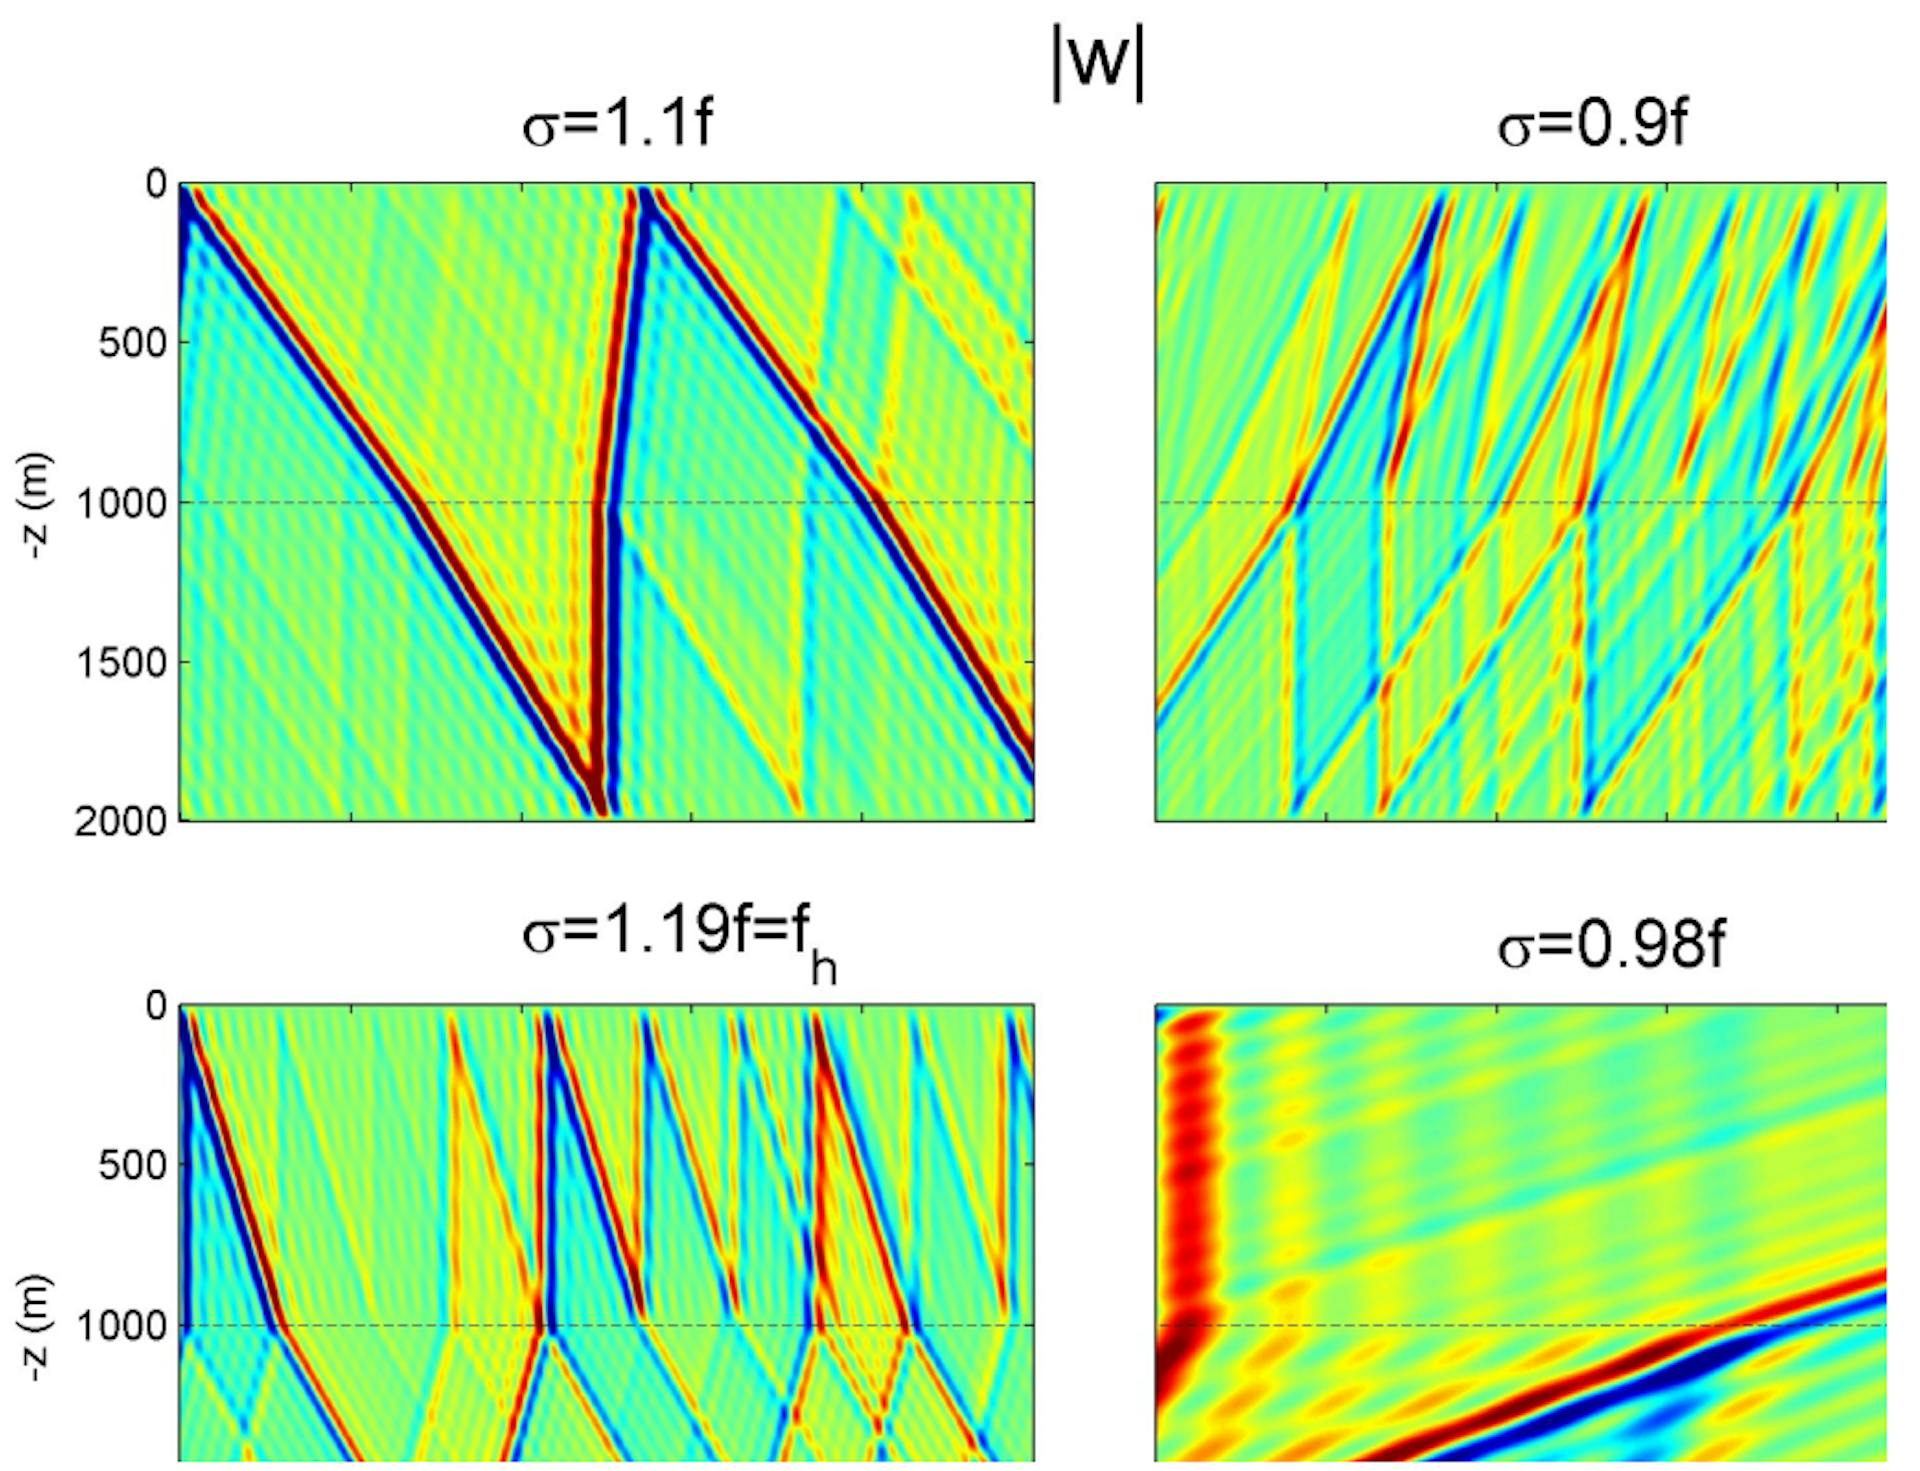 Figure 7. Simulation results of vertical current amplitudes |w| for internal wave ‘beams’ in a vertical-horizontal plane with the seafloor at z = -2000 m. The upper two panels show a transition (dashed line) between a weakly stratified layer above a homogeneous one. The lower two panels show a transition between a stratified layer below a homogeneous one. The left two panels are for super-inertial motions, the right two for sub-inertial motions. The left panels show amplitude enhancement and trapping in the homogeneous N=0 layer, while the right panels show enhancement and trapping in the stratified layer. Note the two different angles to the horizontal of up- and down-going rays, which is typical for the non-traditional approach (Gerkema et al. 2008).